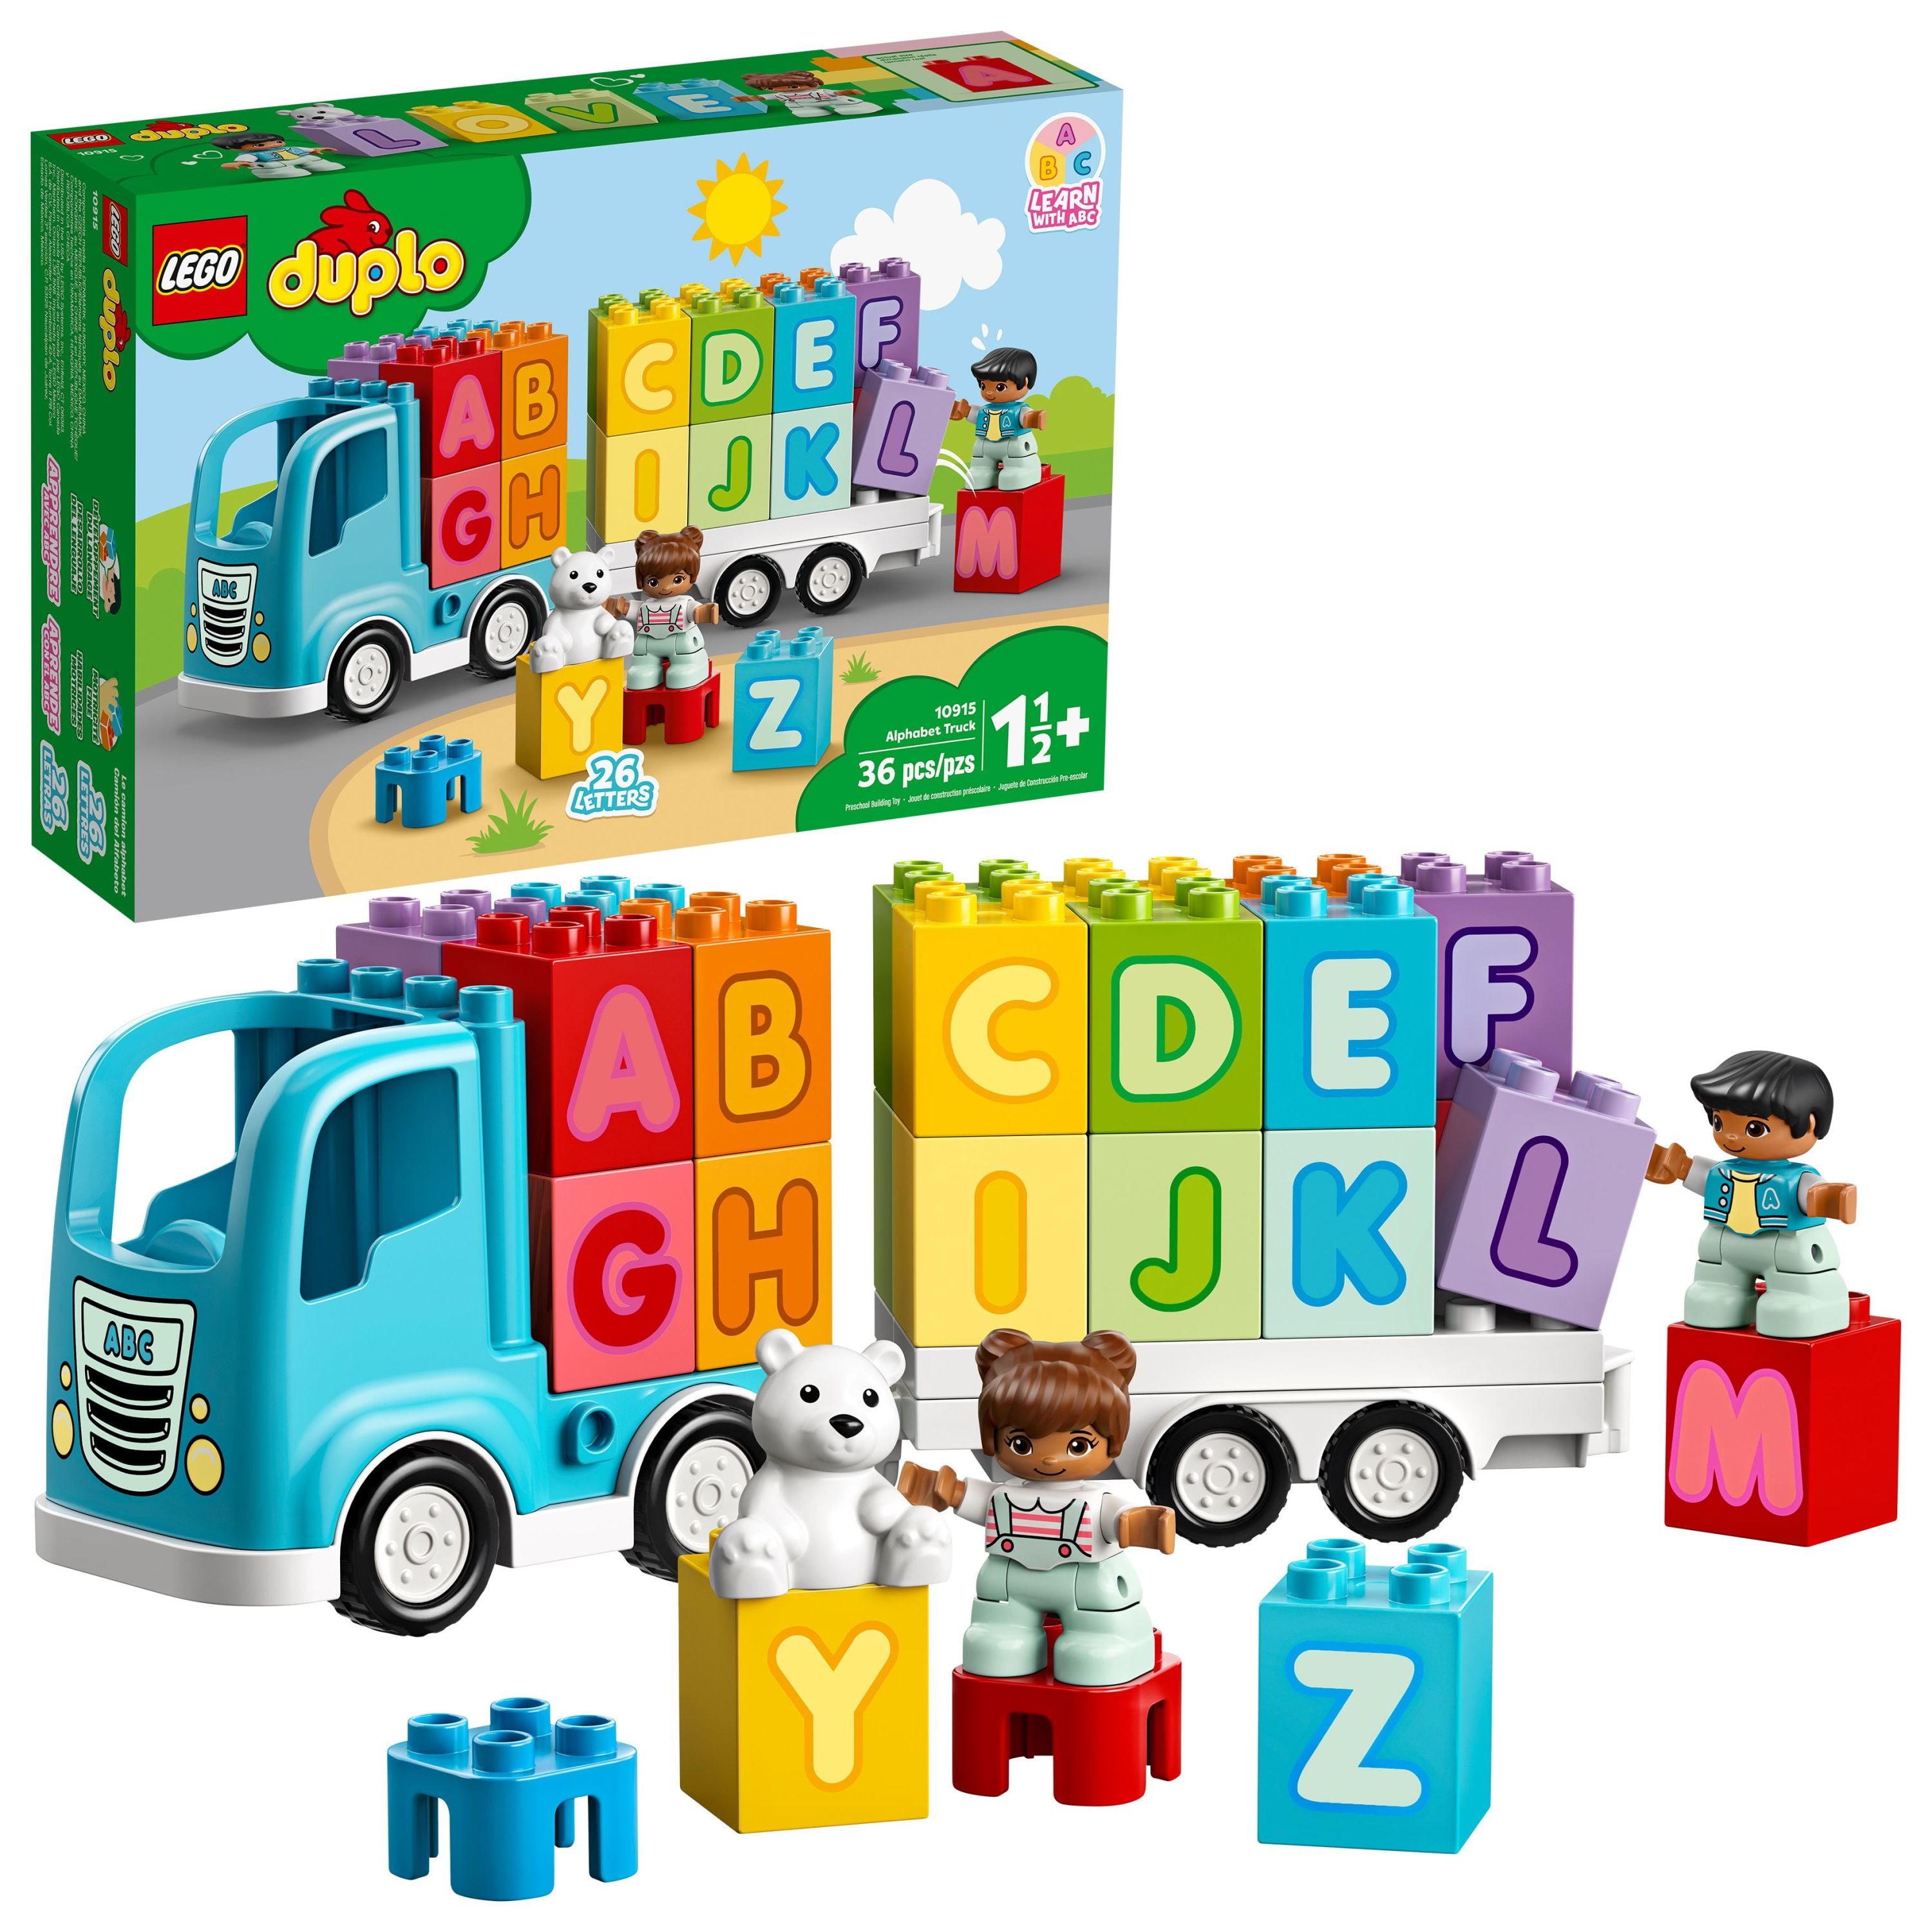 LEGO DUPLO My First Alphabet Truck Educational Building Toy for Toddlers Pieces) - Walmart.com